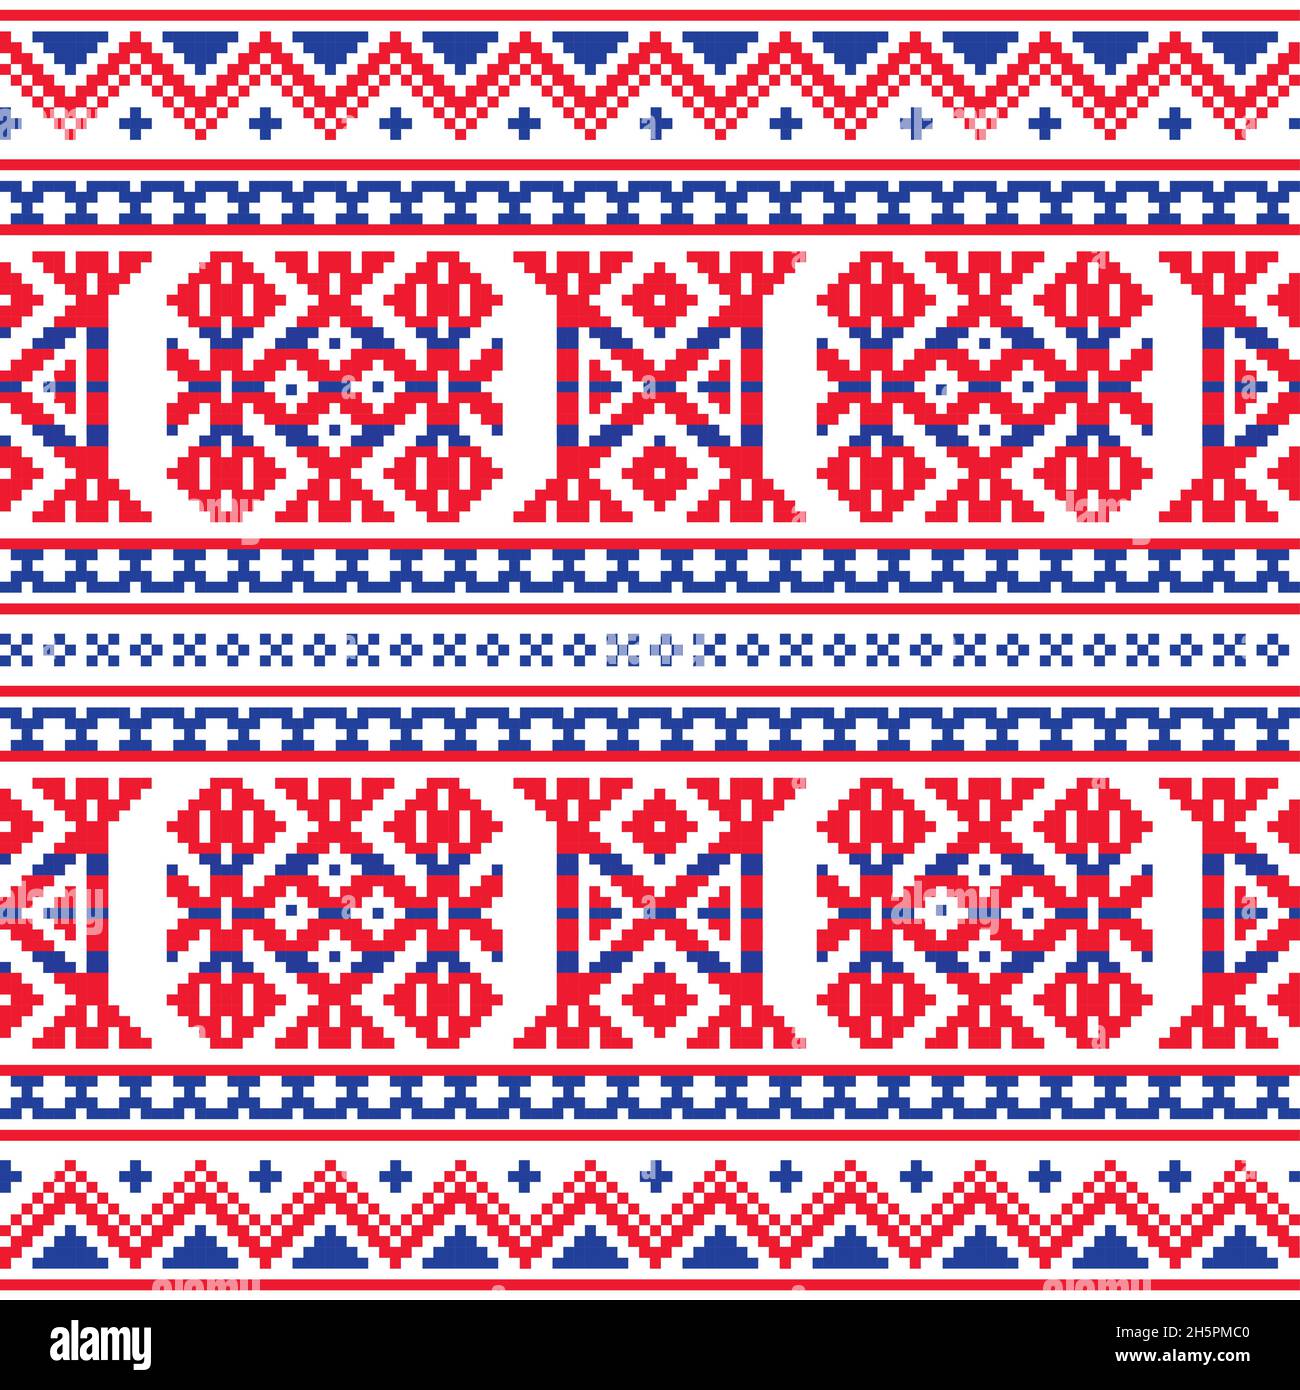 Sami folk art vector seamless pattern, retro design styled as traditional cross-stitch ornament from Lapland in red and blue Stock Vector